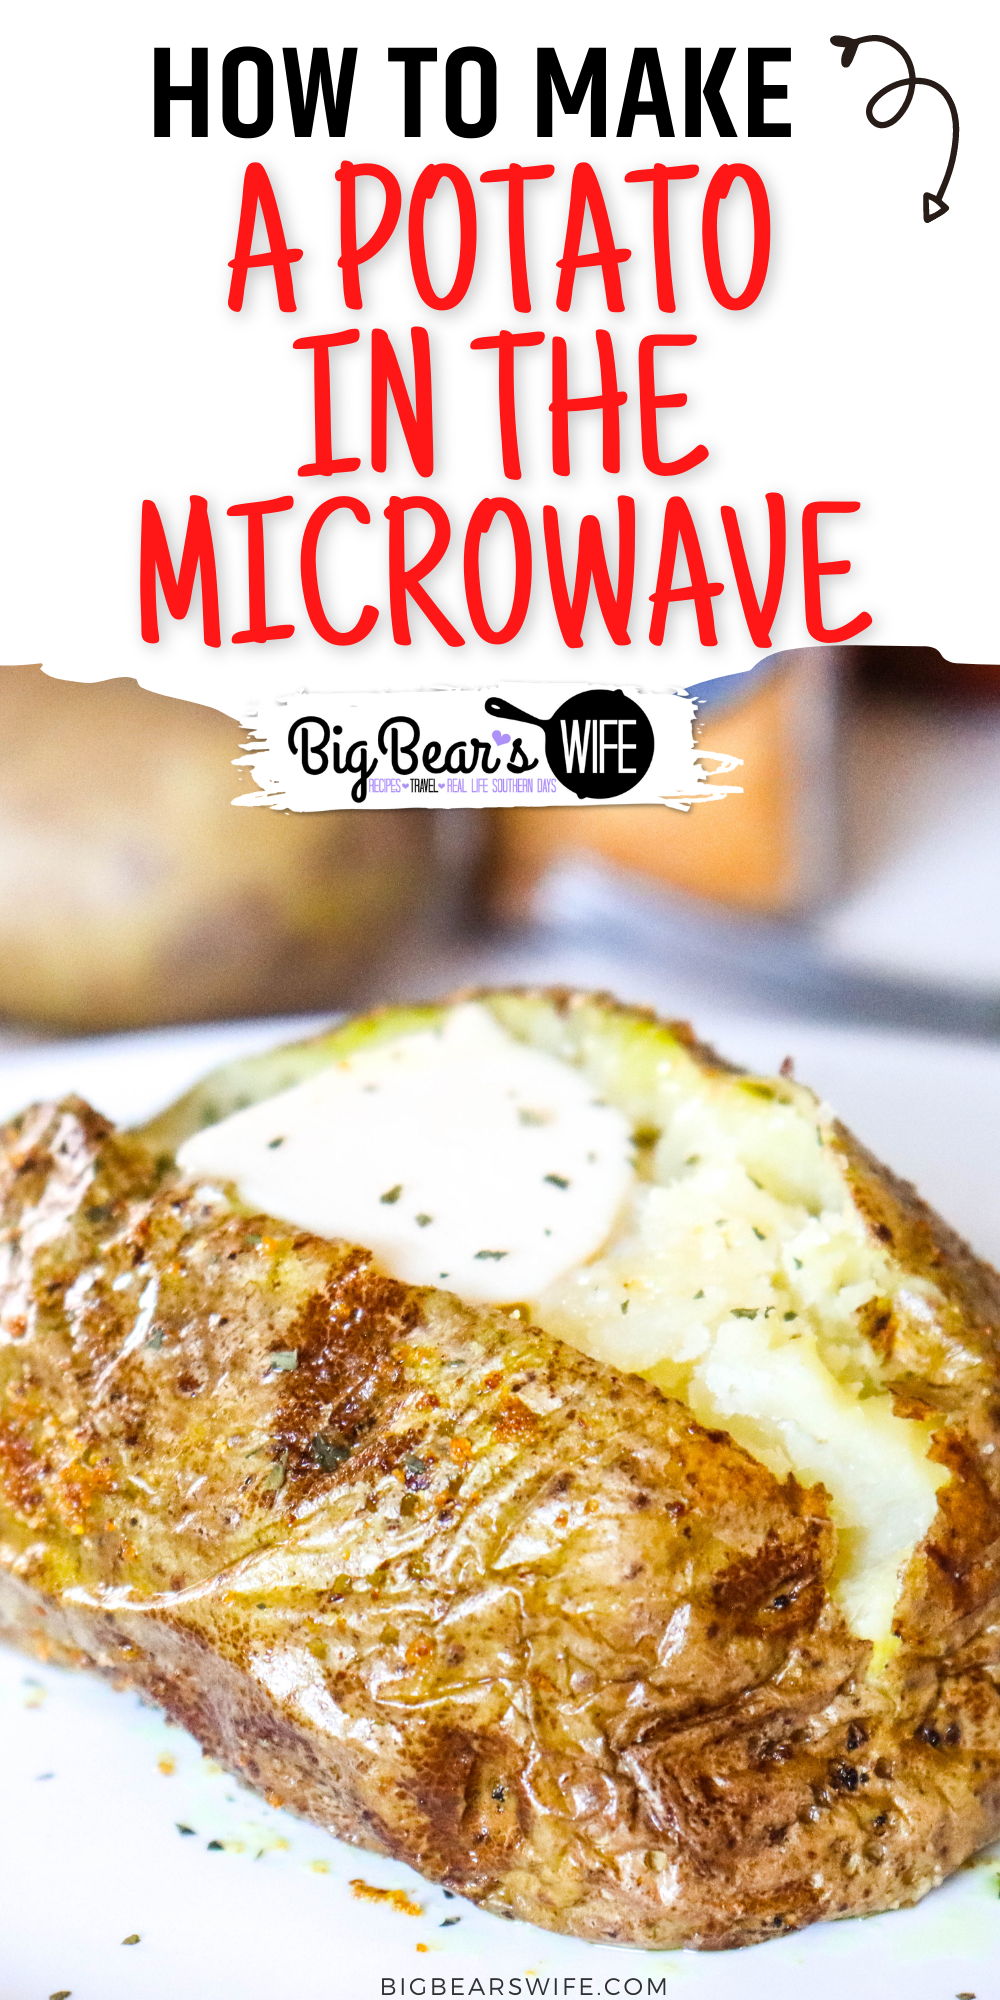 Love Baked Potatoes but short on time? No problem! I'll show you How to Cook a Potato in the Microwave in 5-10 minutes!  via @bigbearswife